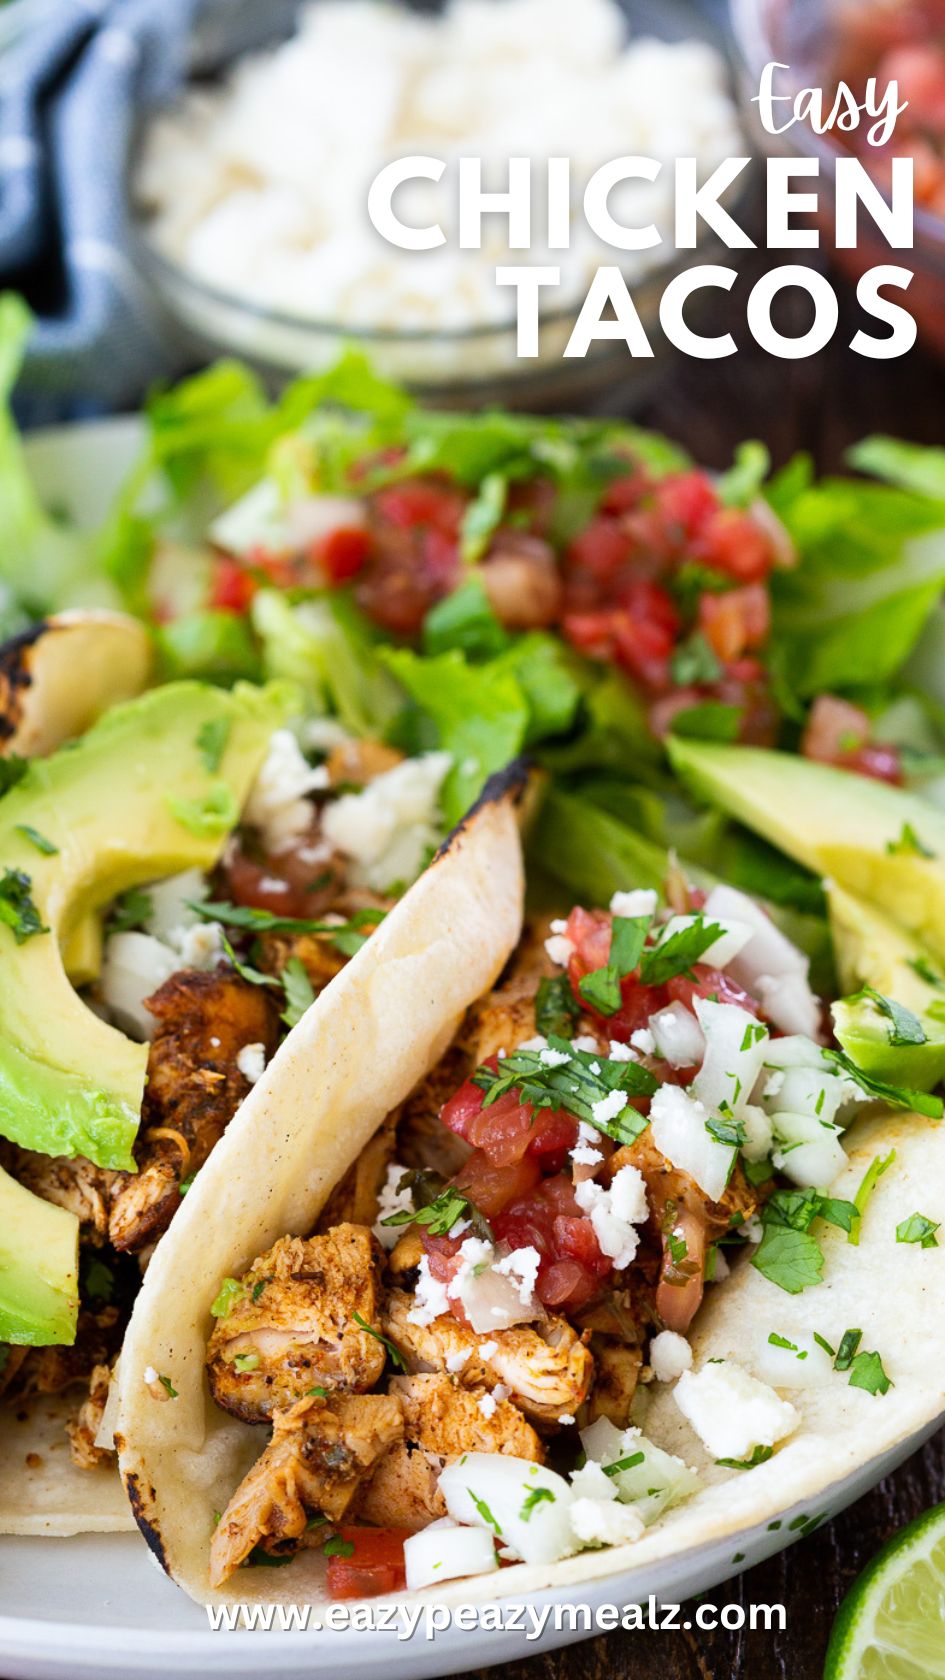 Looking for a quick and delicious meal? Try these easy chicken tacos, ready in under 30 minutes! With tender chicken, flavorful spices, and your favorite toppings, they're sure to become a family favorite. Perfect for busy weeknights or a casual dinner with friends. #easyrecipes #chickentacos #30minutemeals